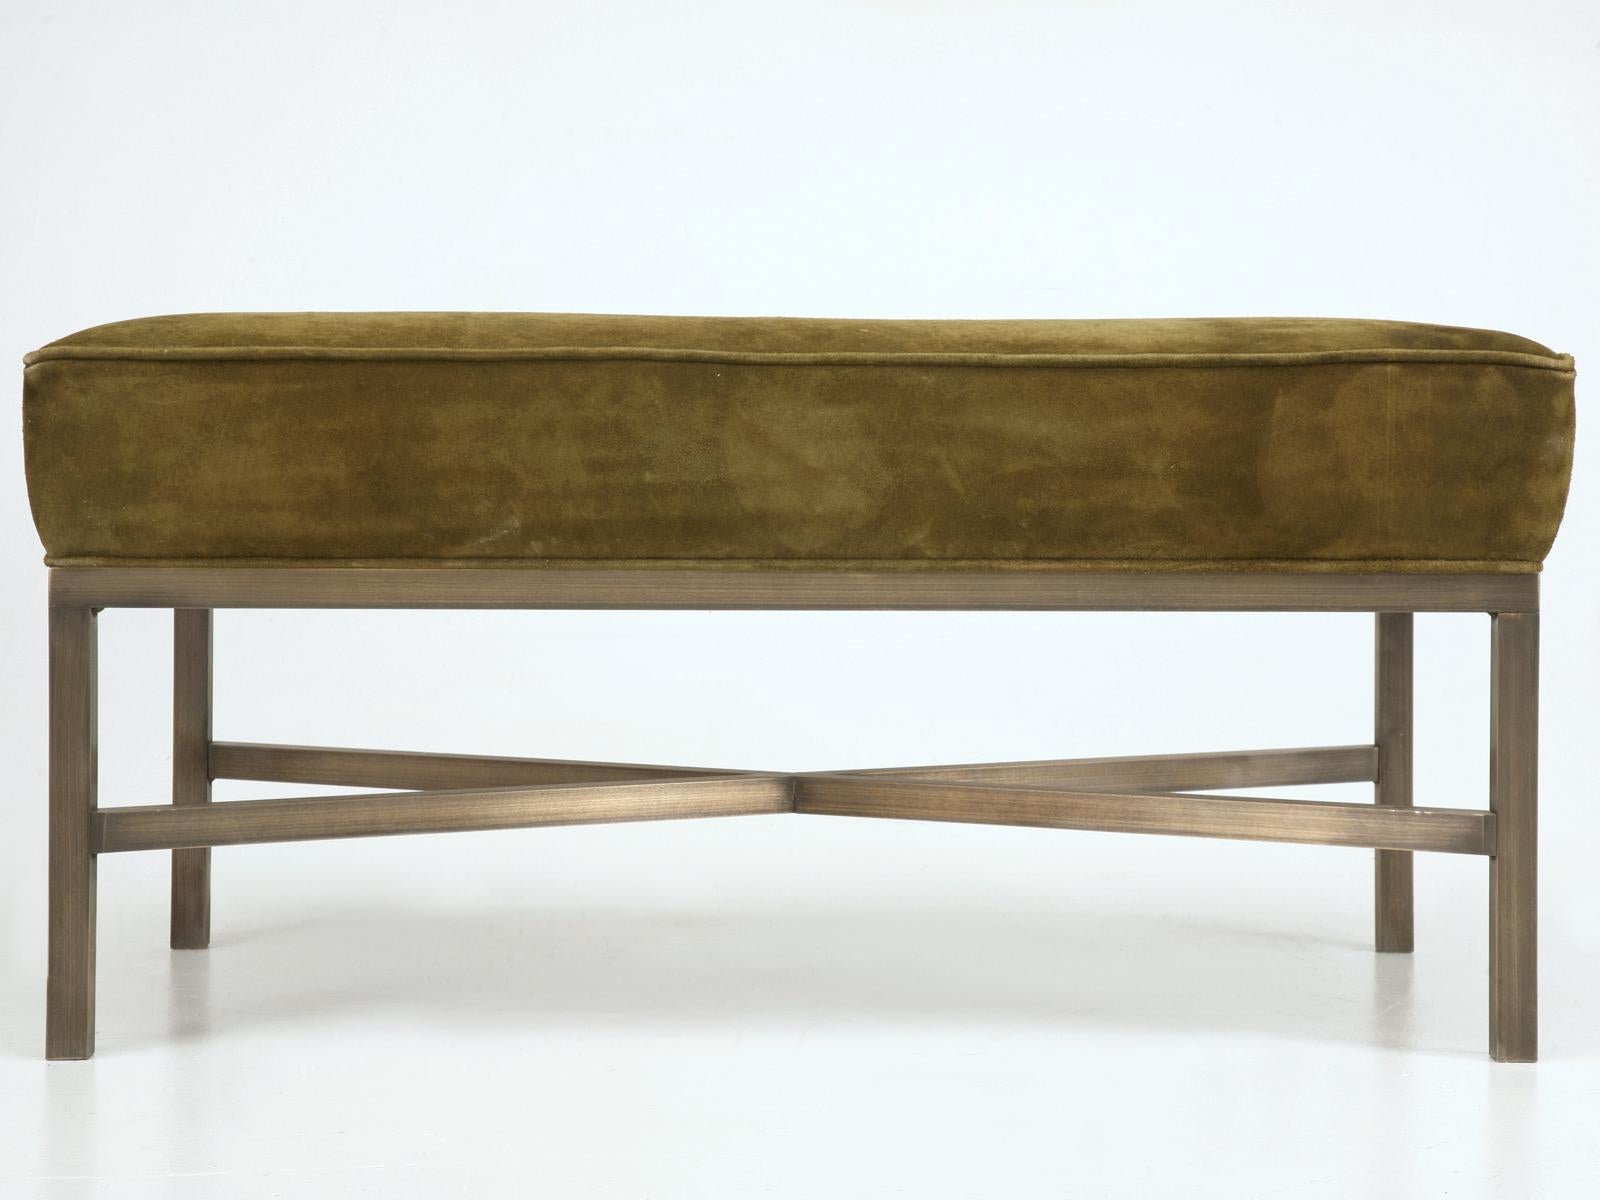 New handmade in our Chicago workshop is a custom upholstered bench with antiqued solid bronze frame and upholstered seat cushion. This Minimalist bench is elegant in its simplicity and can be reproduced in any dimension. The frame can also be made